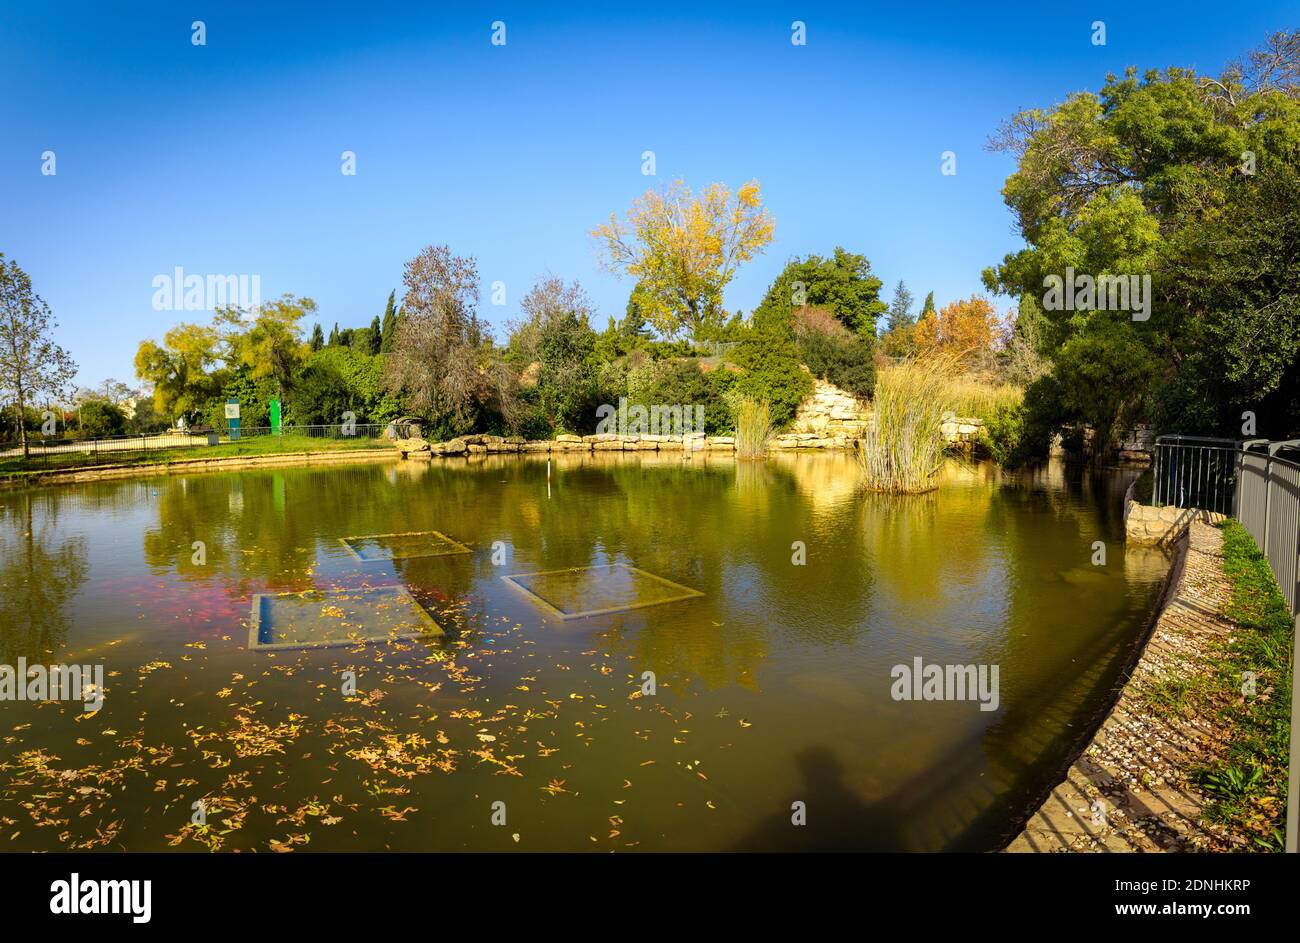 Panoramic image of the artificial lake in the middle of The Wohl Rose Park  (Hebrew: Gan HaVradim) in Givat Ram, Jerusalem, Israel Stock Photo - Alamy